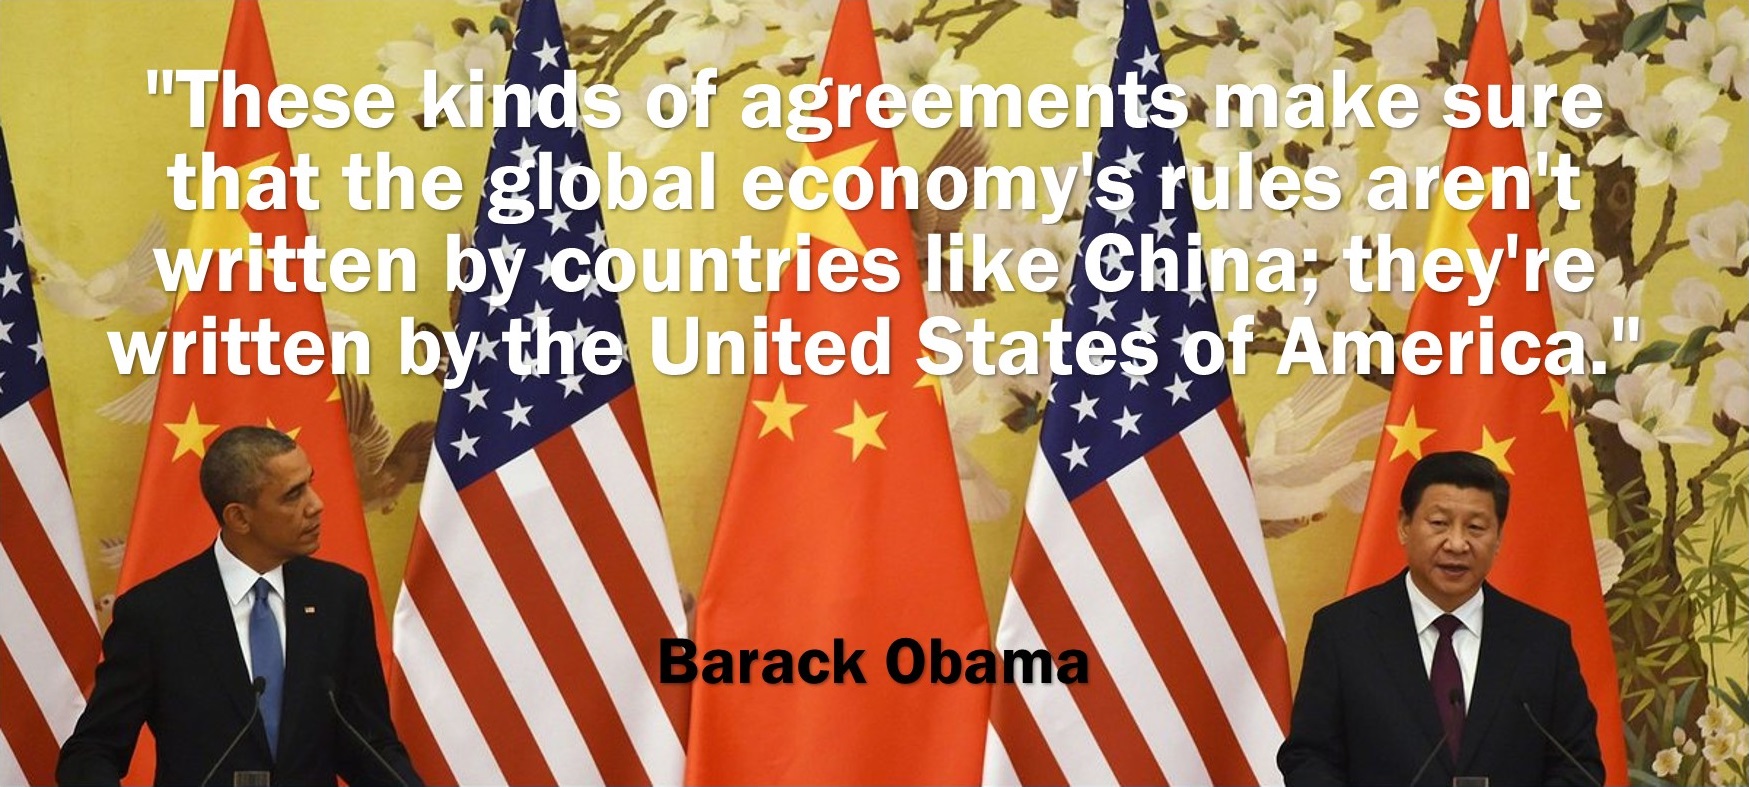 tisa-ttip-and-tpp-corporate-hegemony-and-economic-warfare-obama-trade-deals-china-global-economy-rules-1